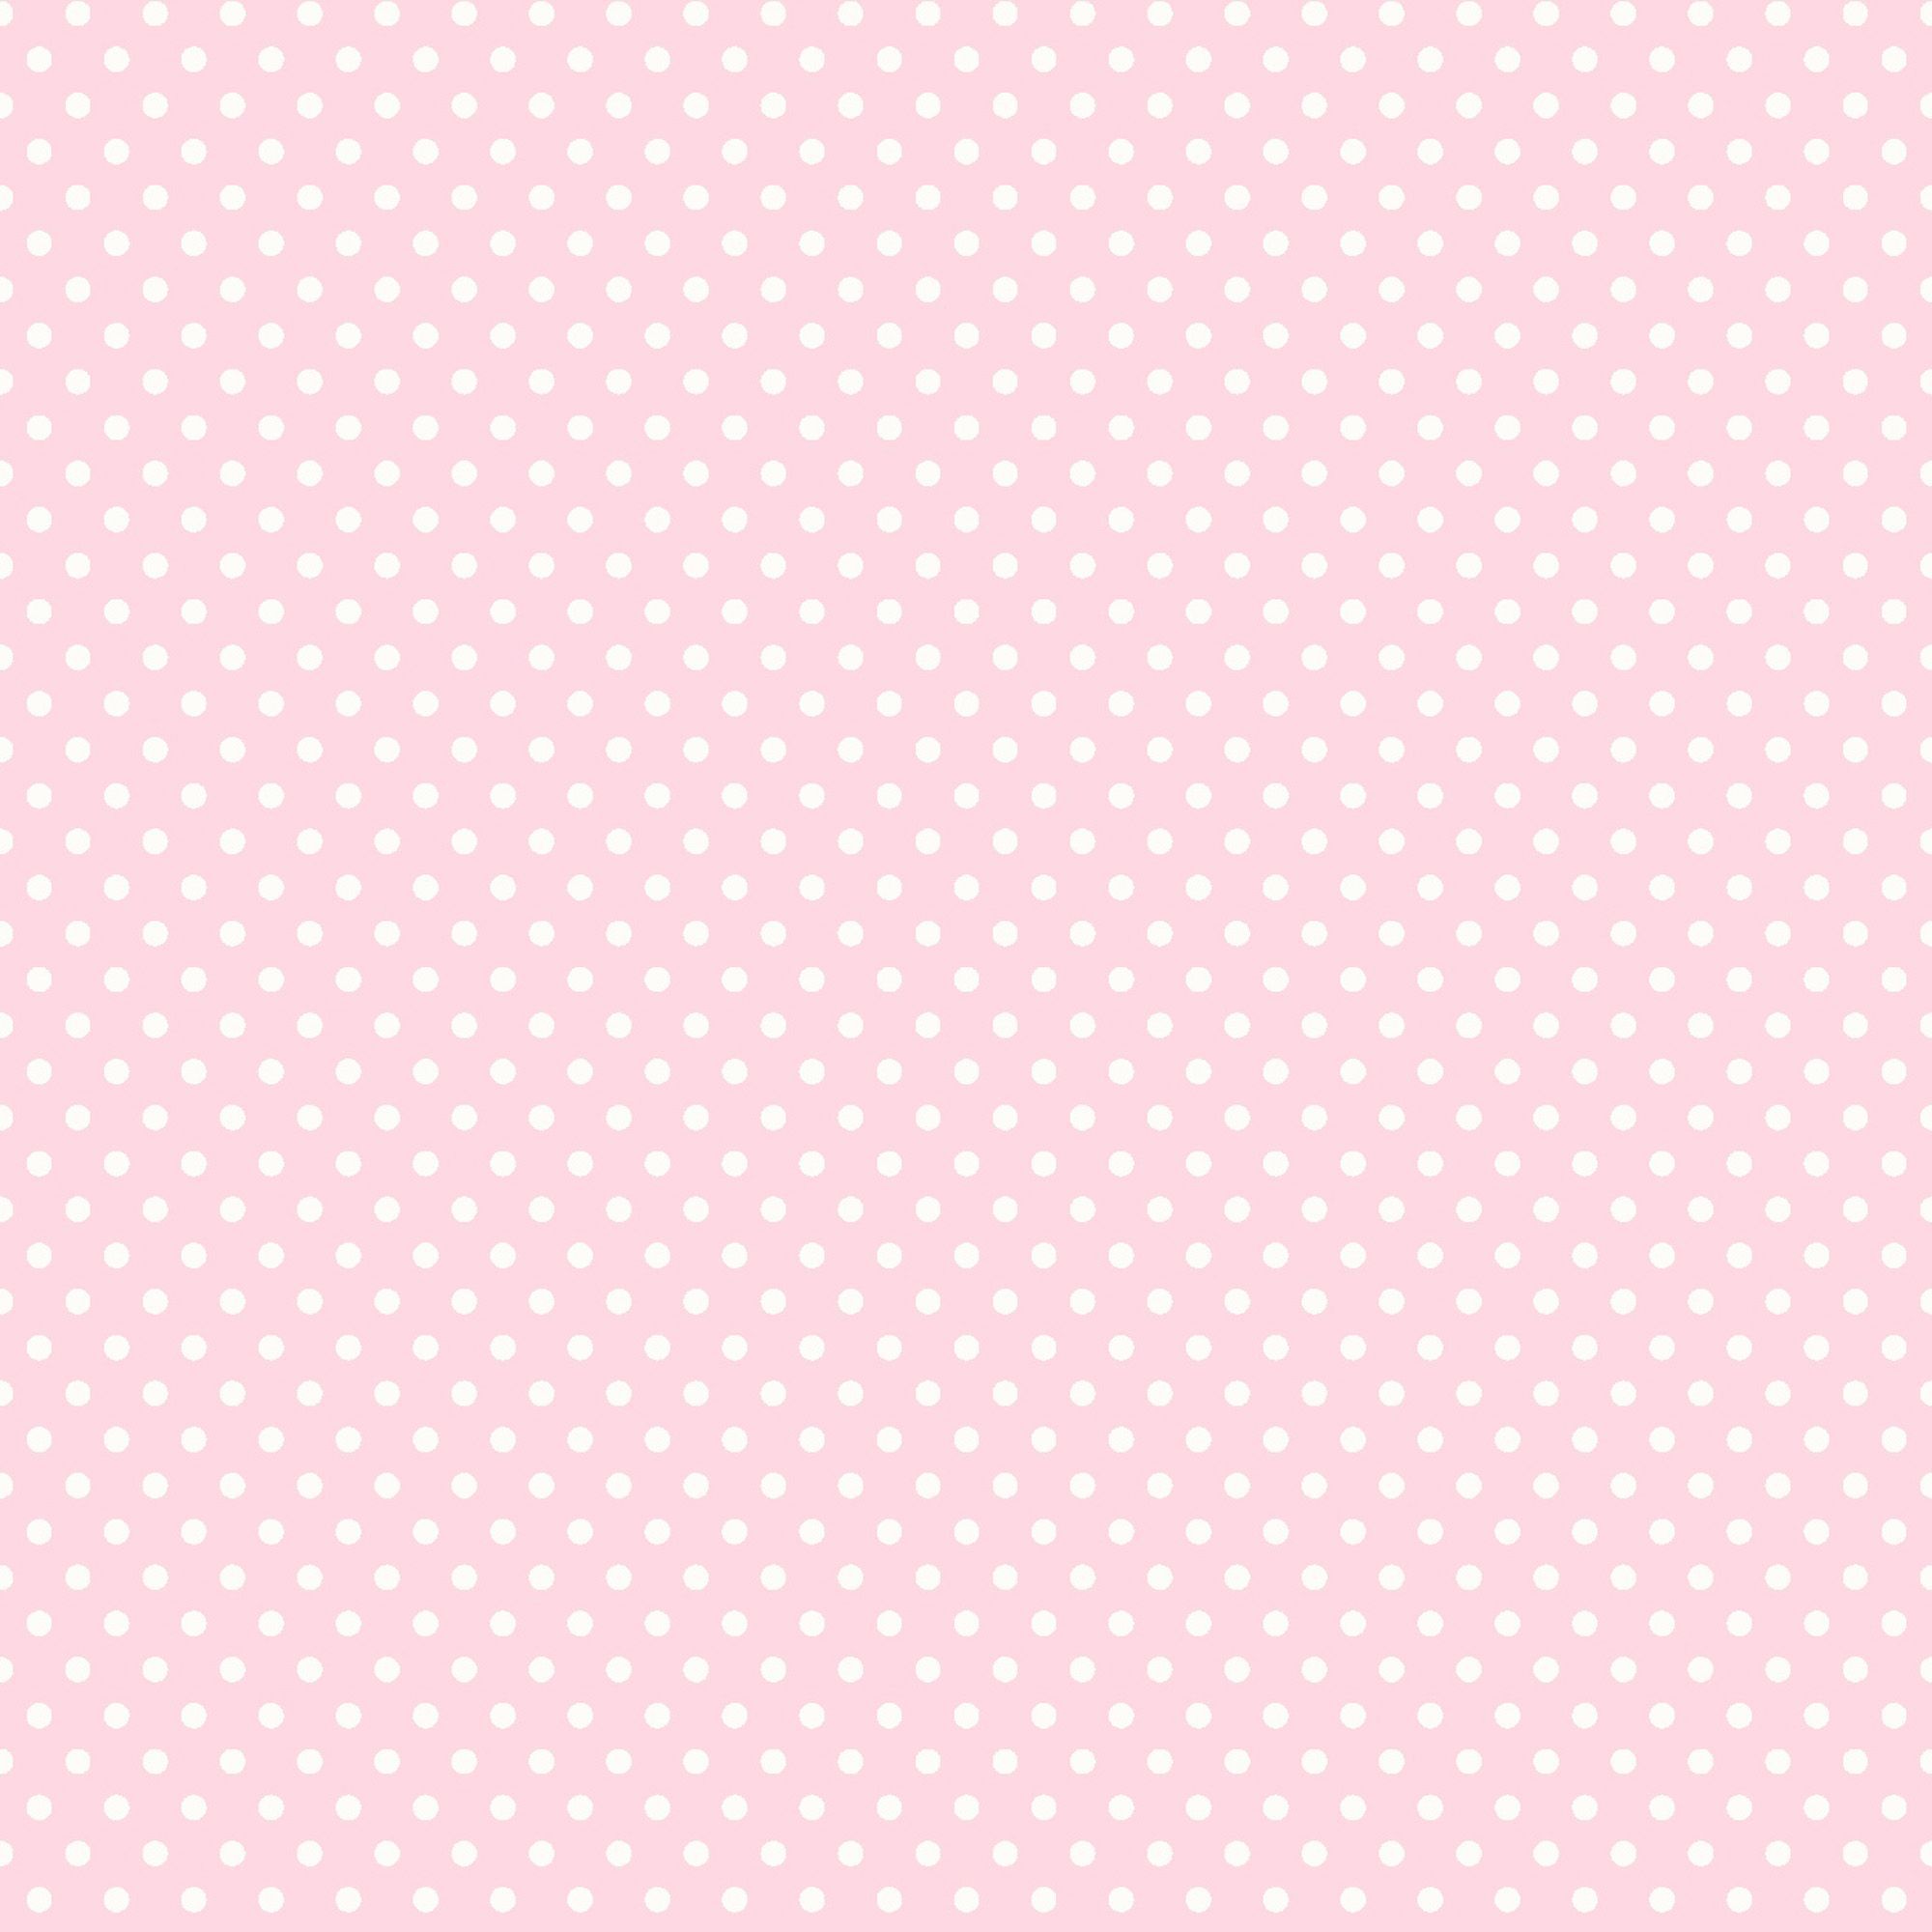 Pink And White Wallpapers